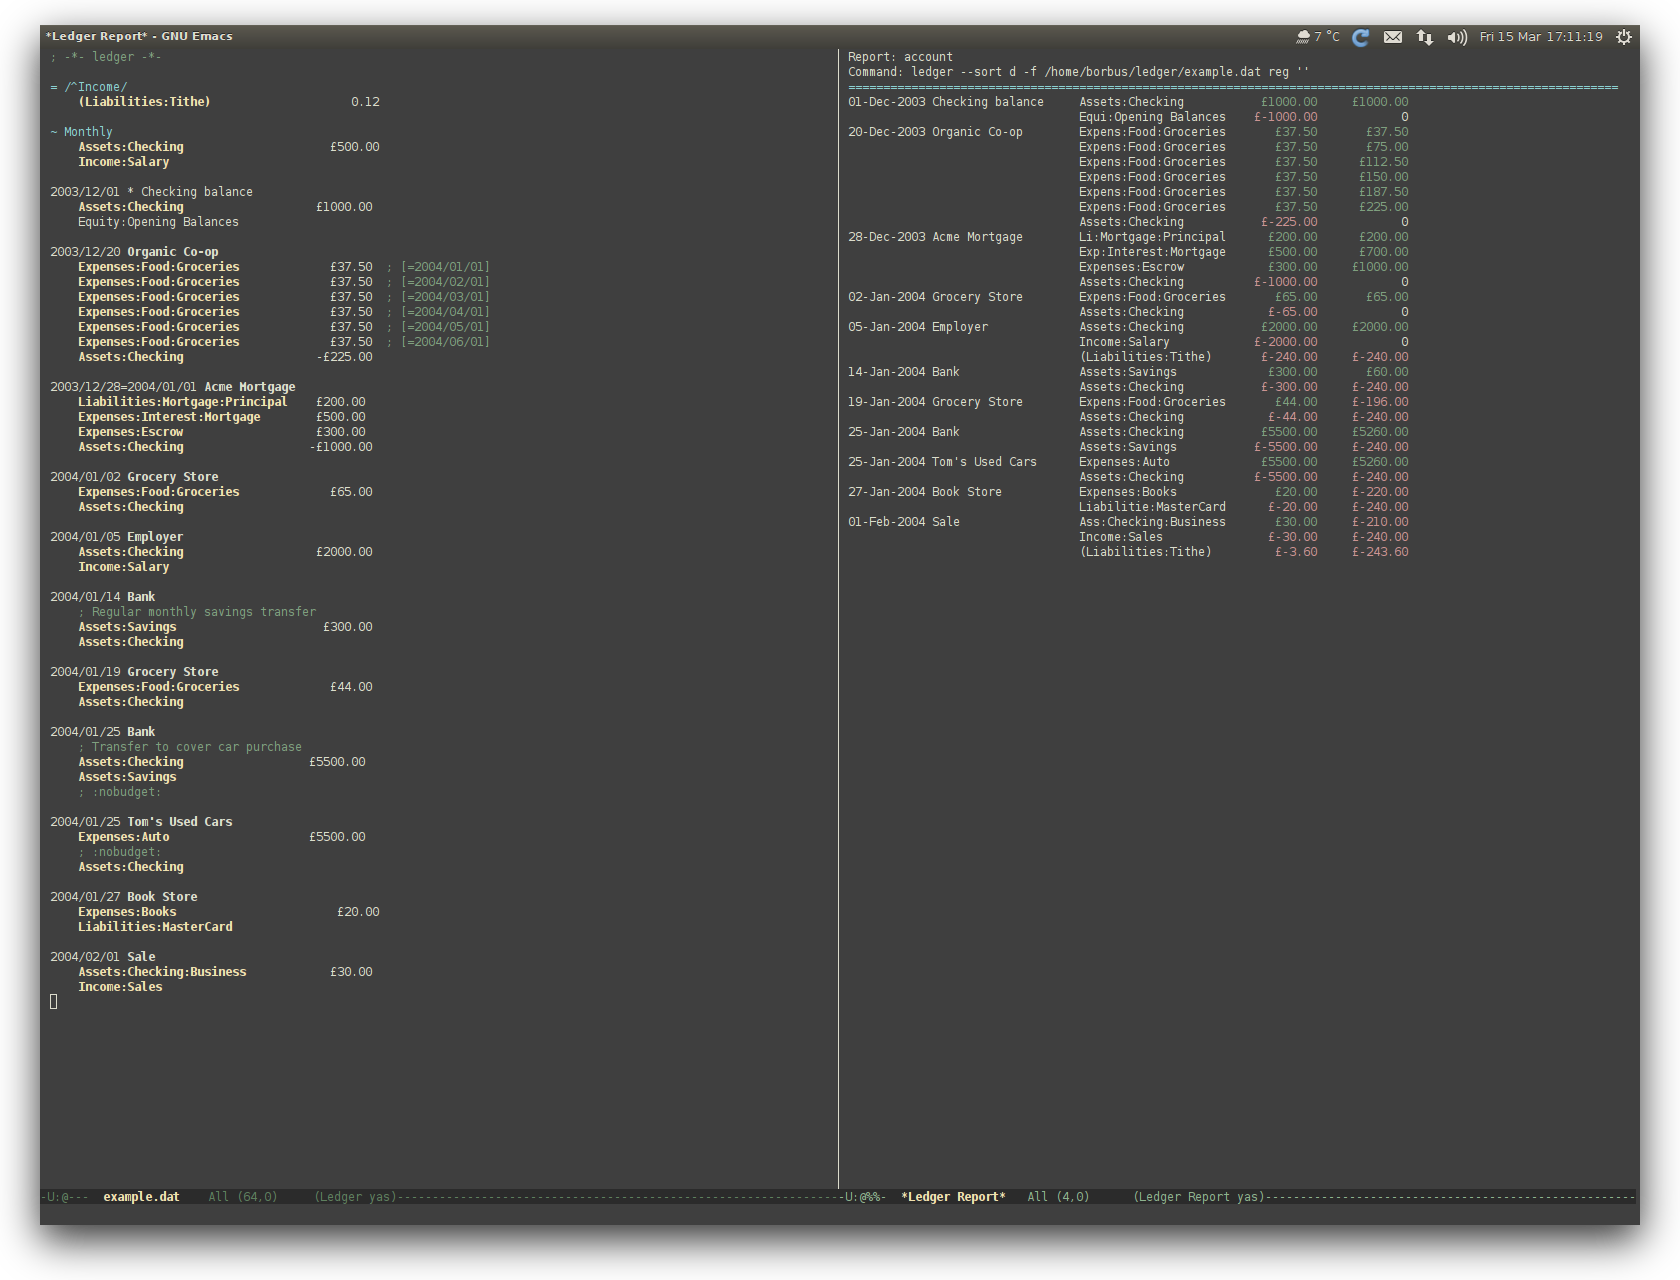 /TakeV/spacemacs/media/commit/c2ae7ce9d29a6ccece823fd4477ab62f53248a86/layers/finance/img/ledger.png